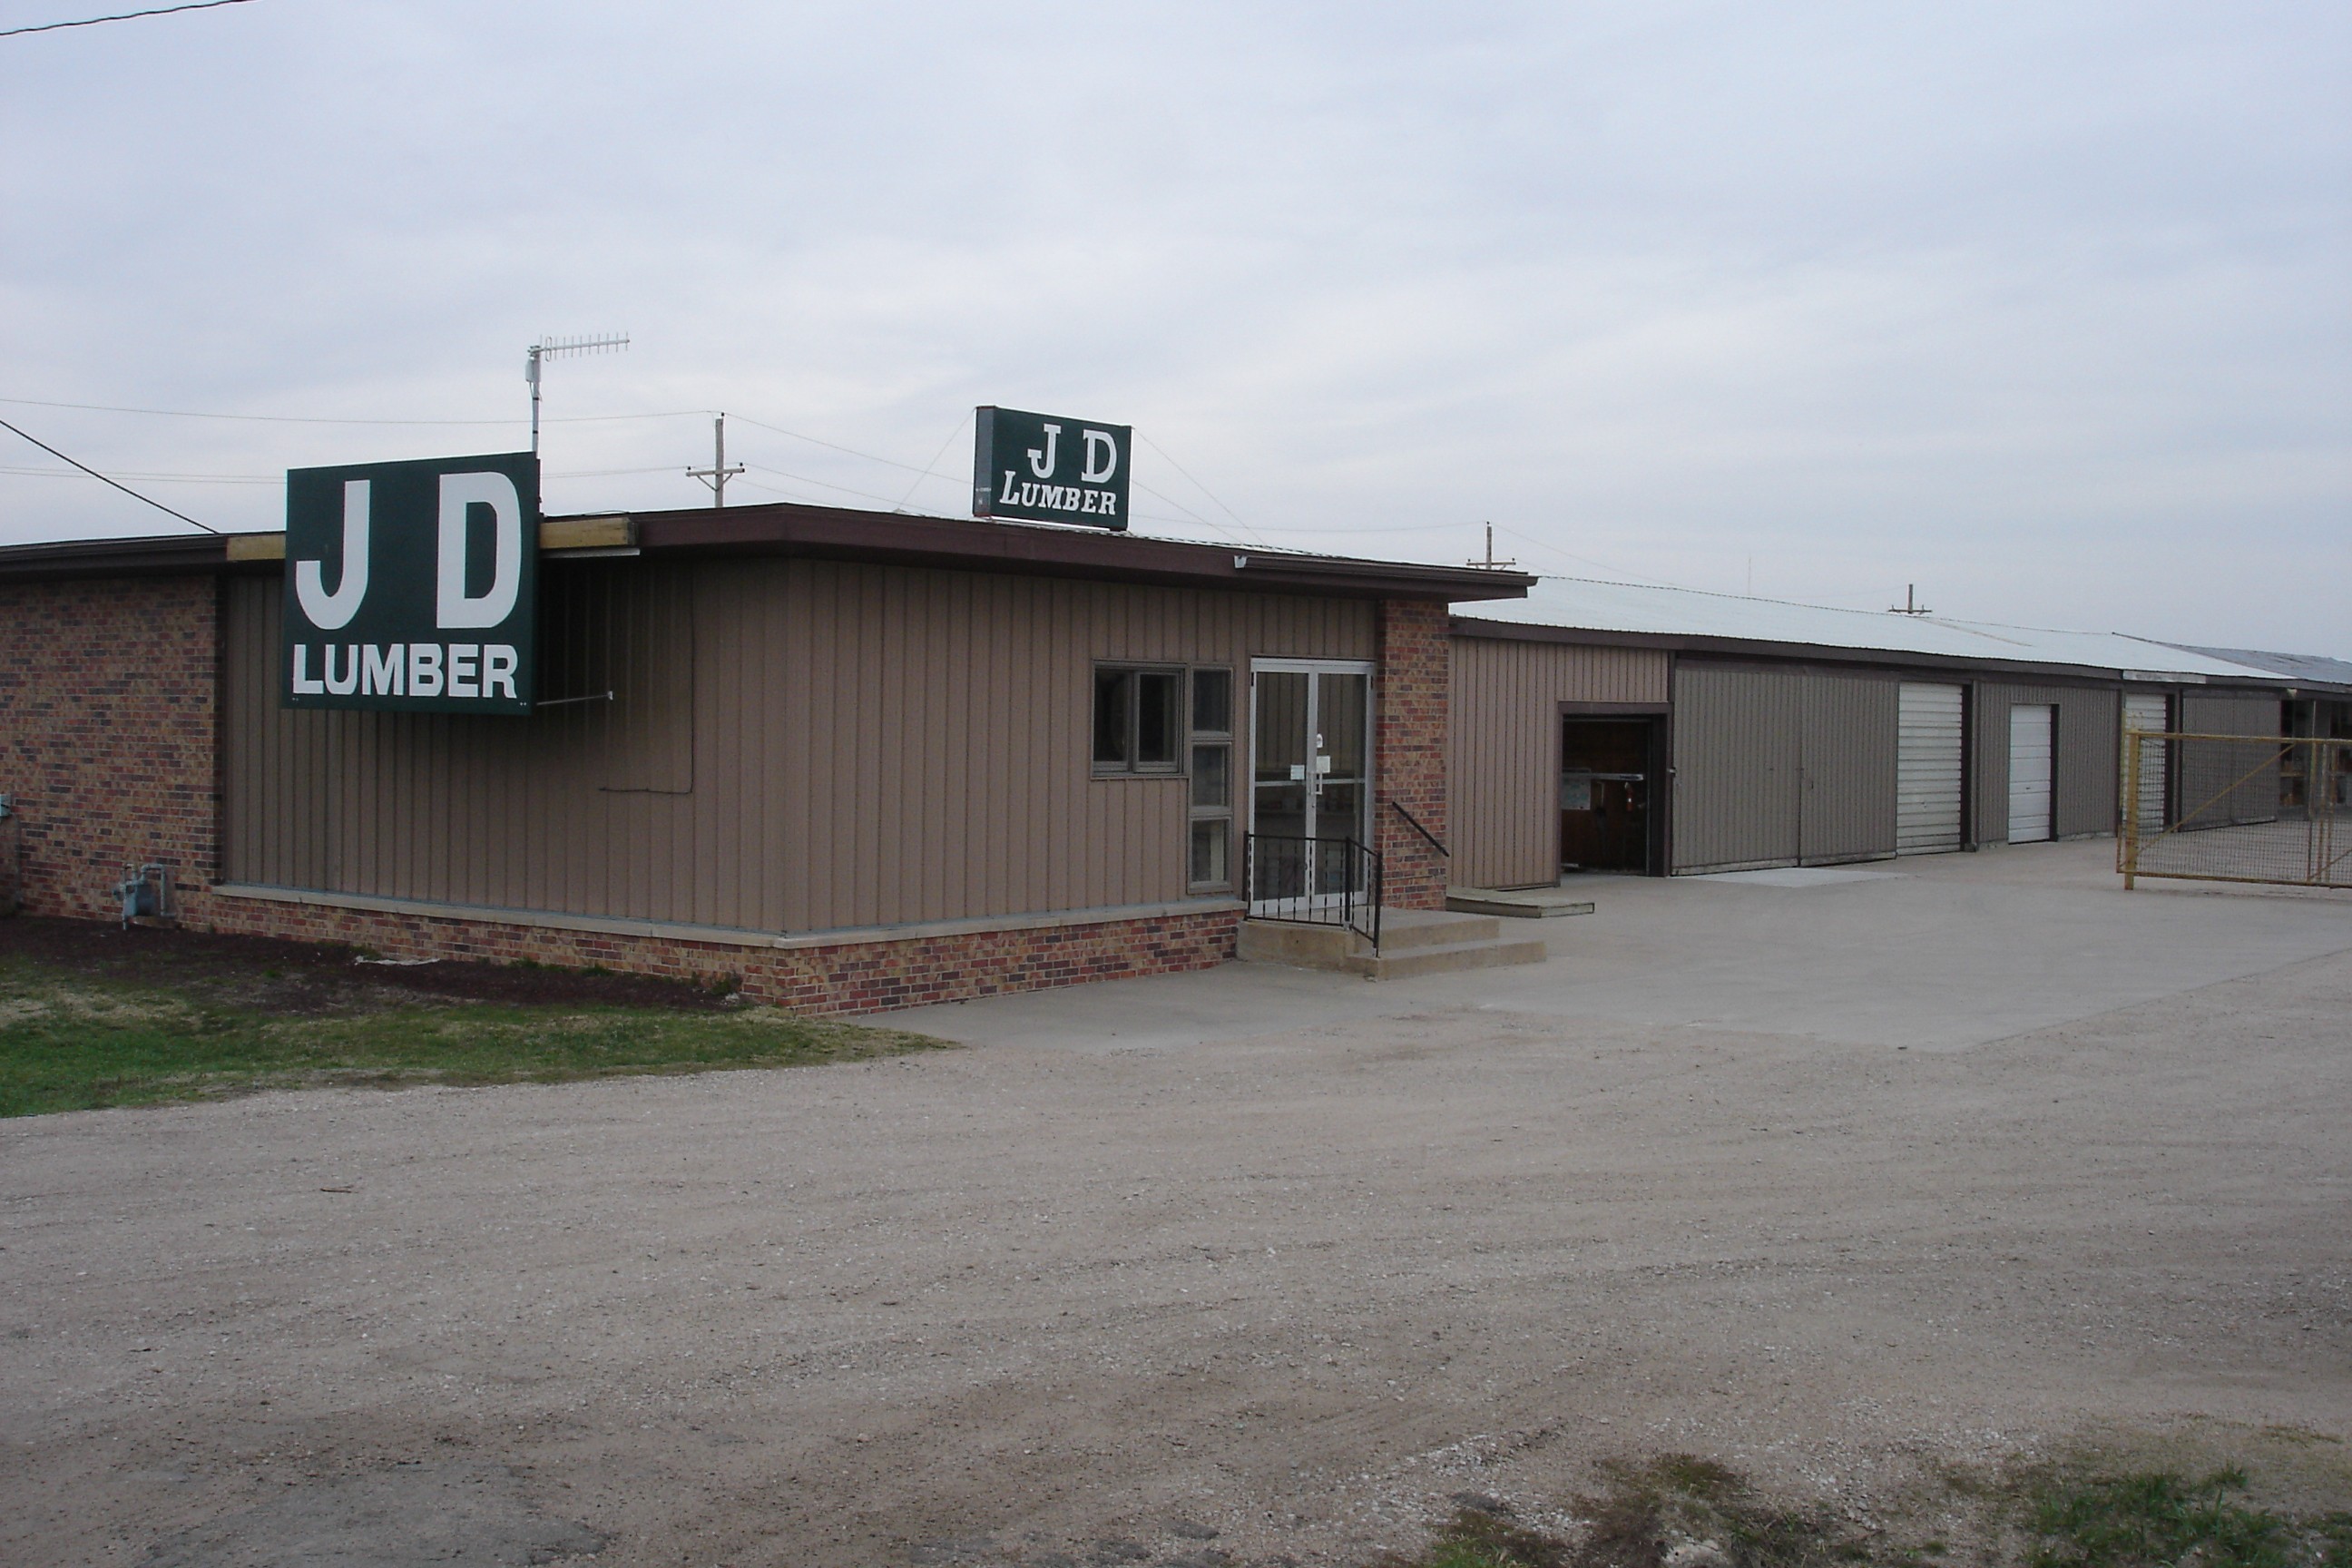 A picture of the J D Lumber's store